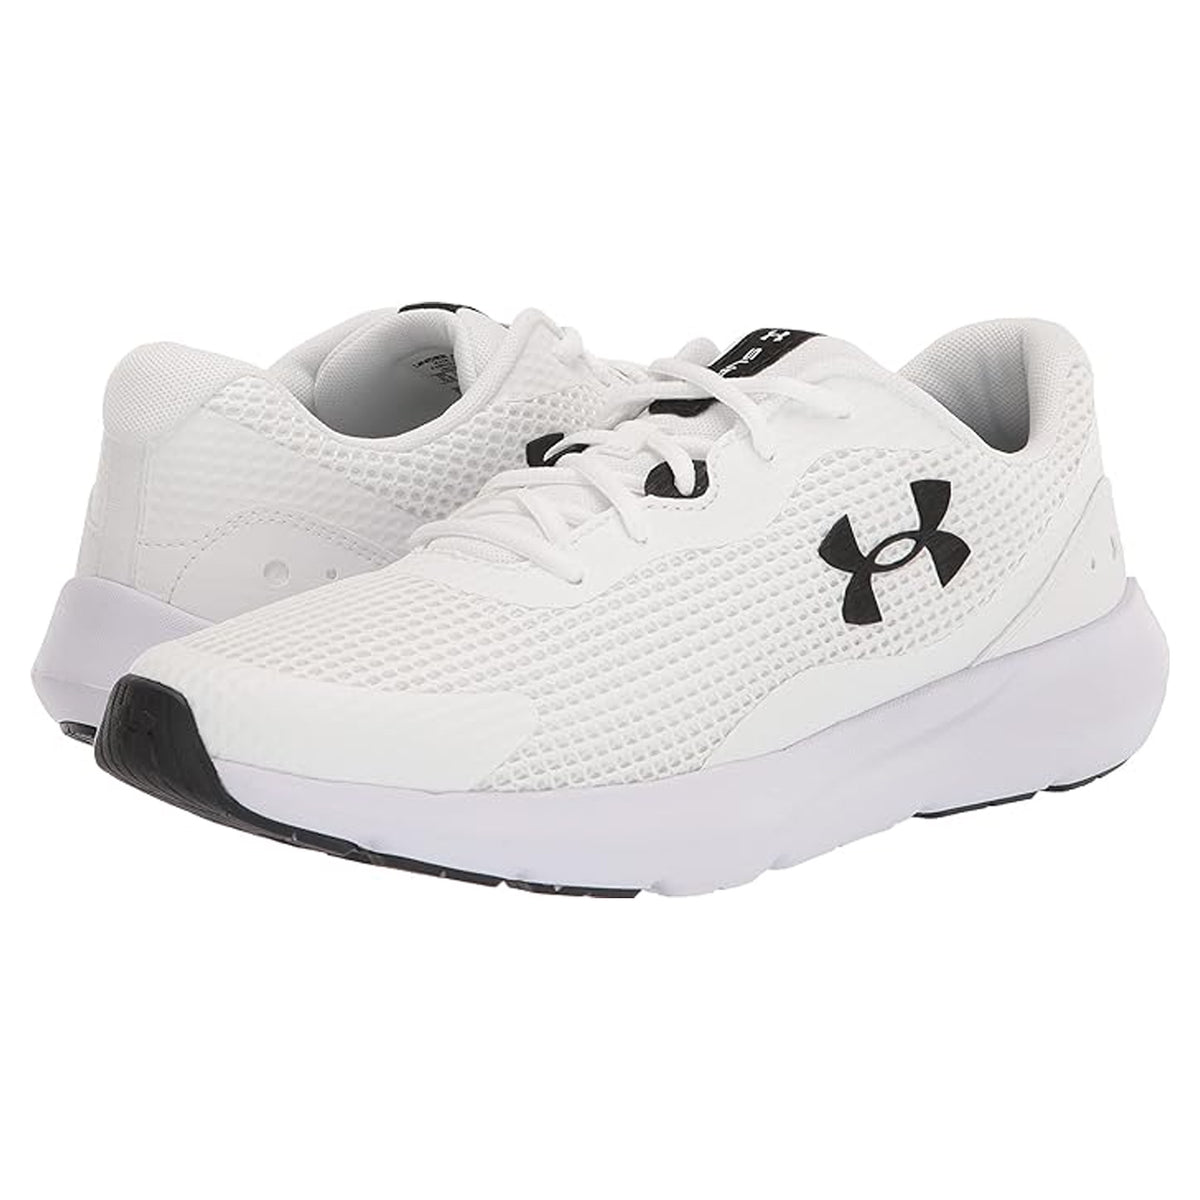 Under Armour Charged Pursuit Mens Running Shoes: White